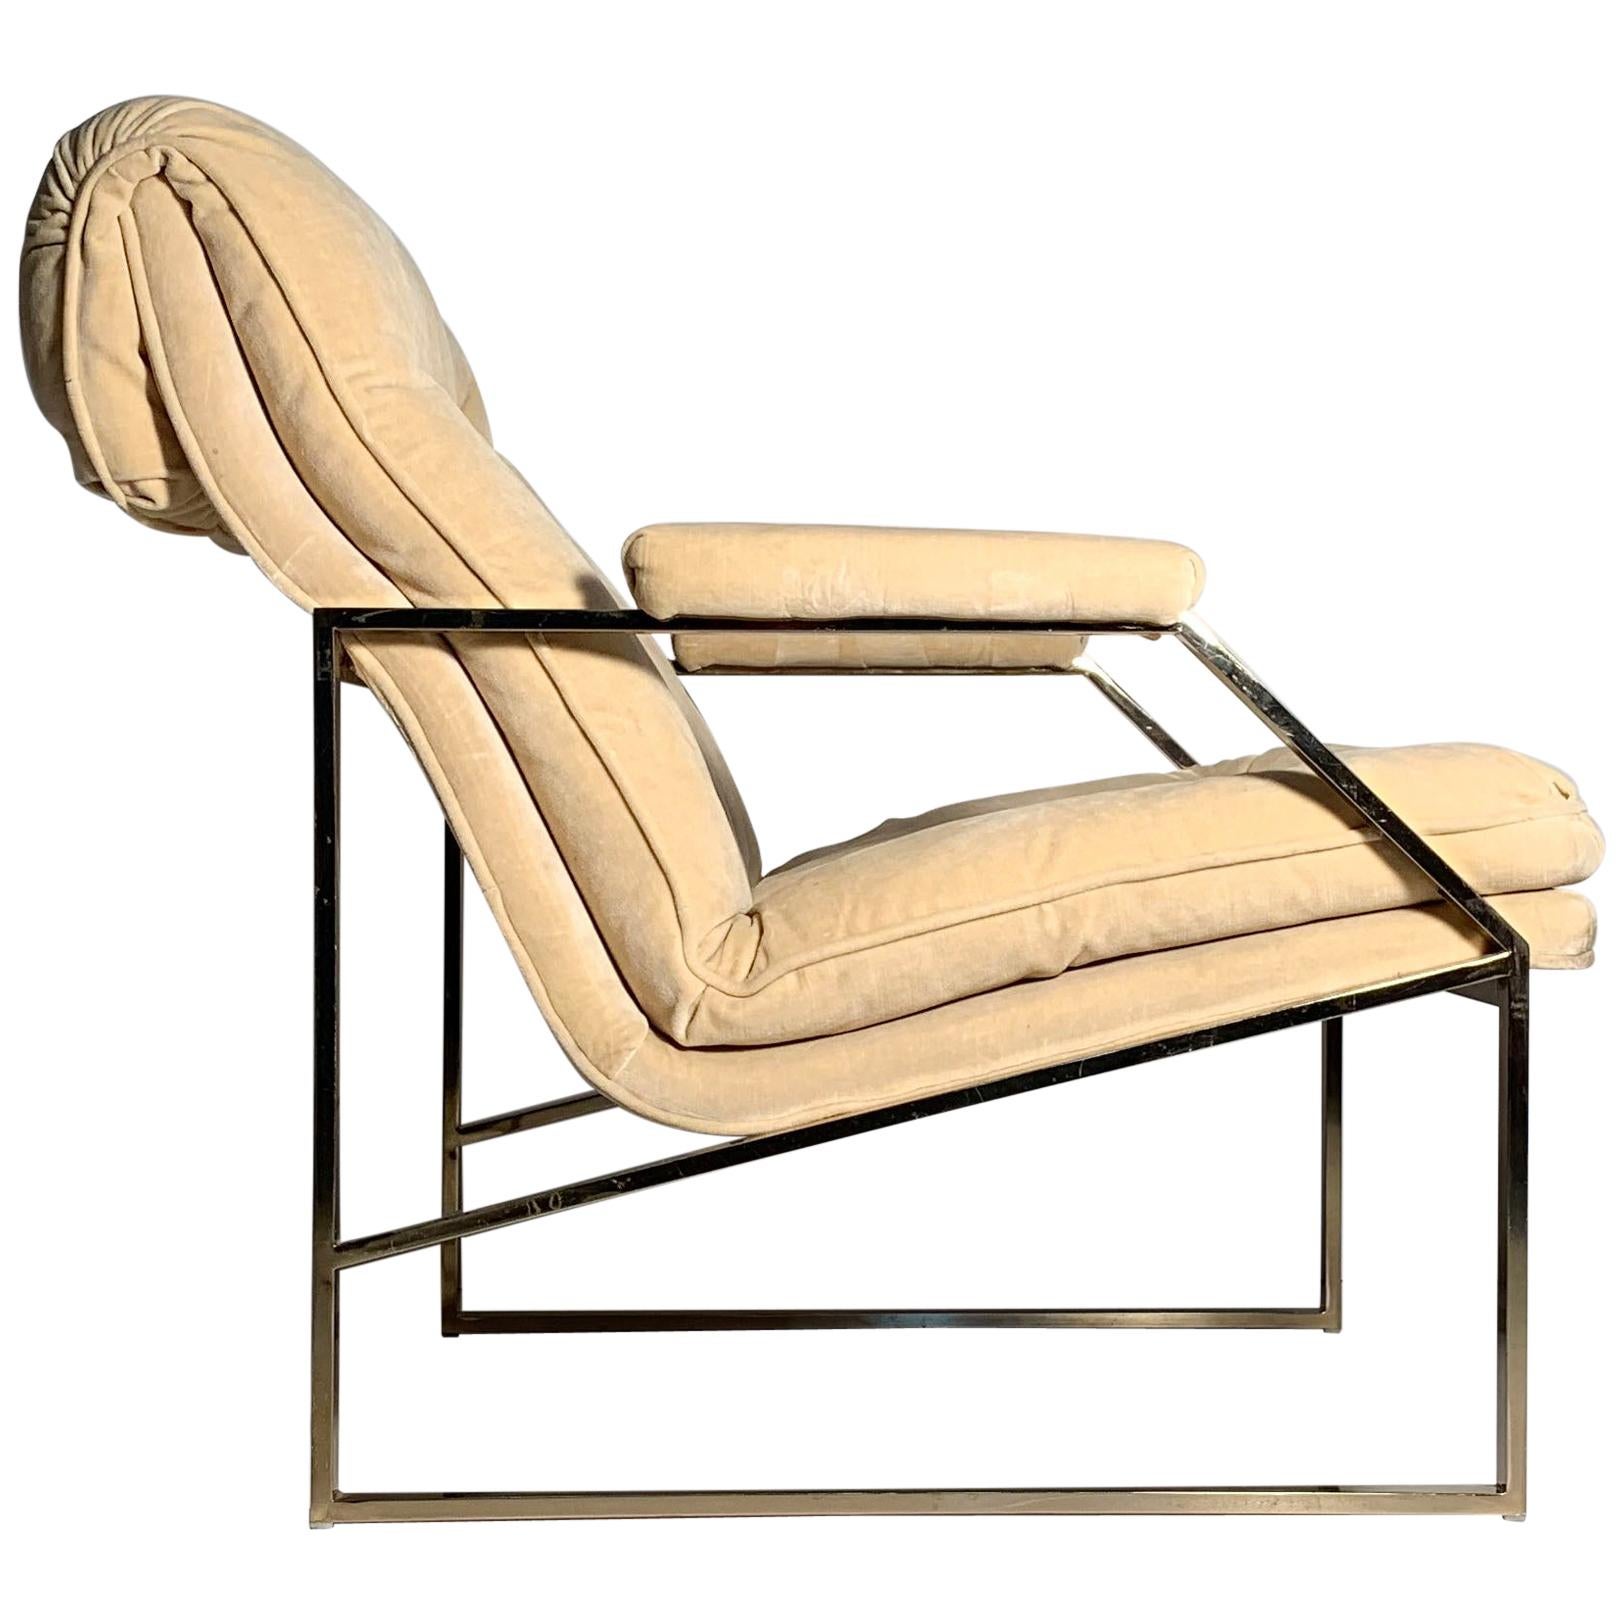 Vintage Architectural Lounge Chair attributed to Milo Baughman